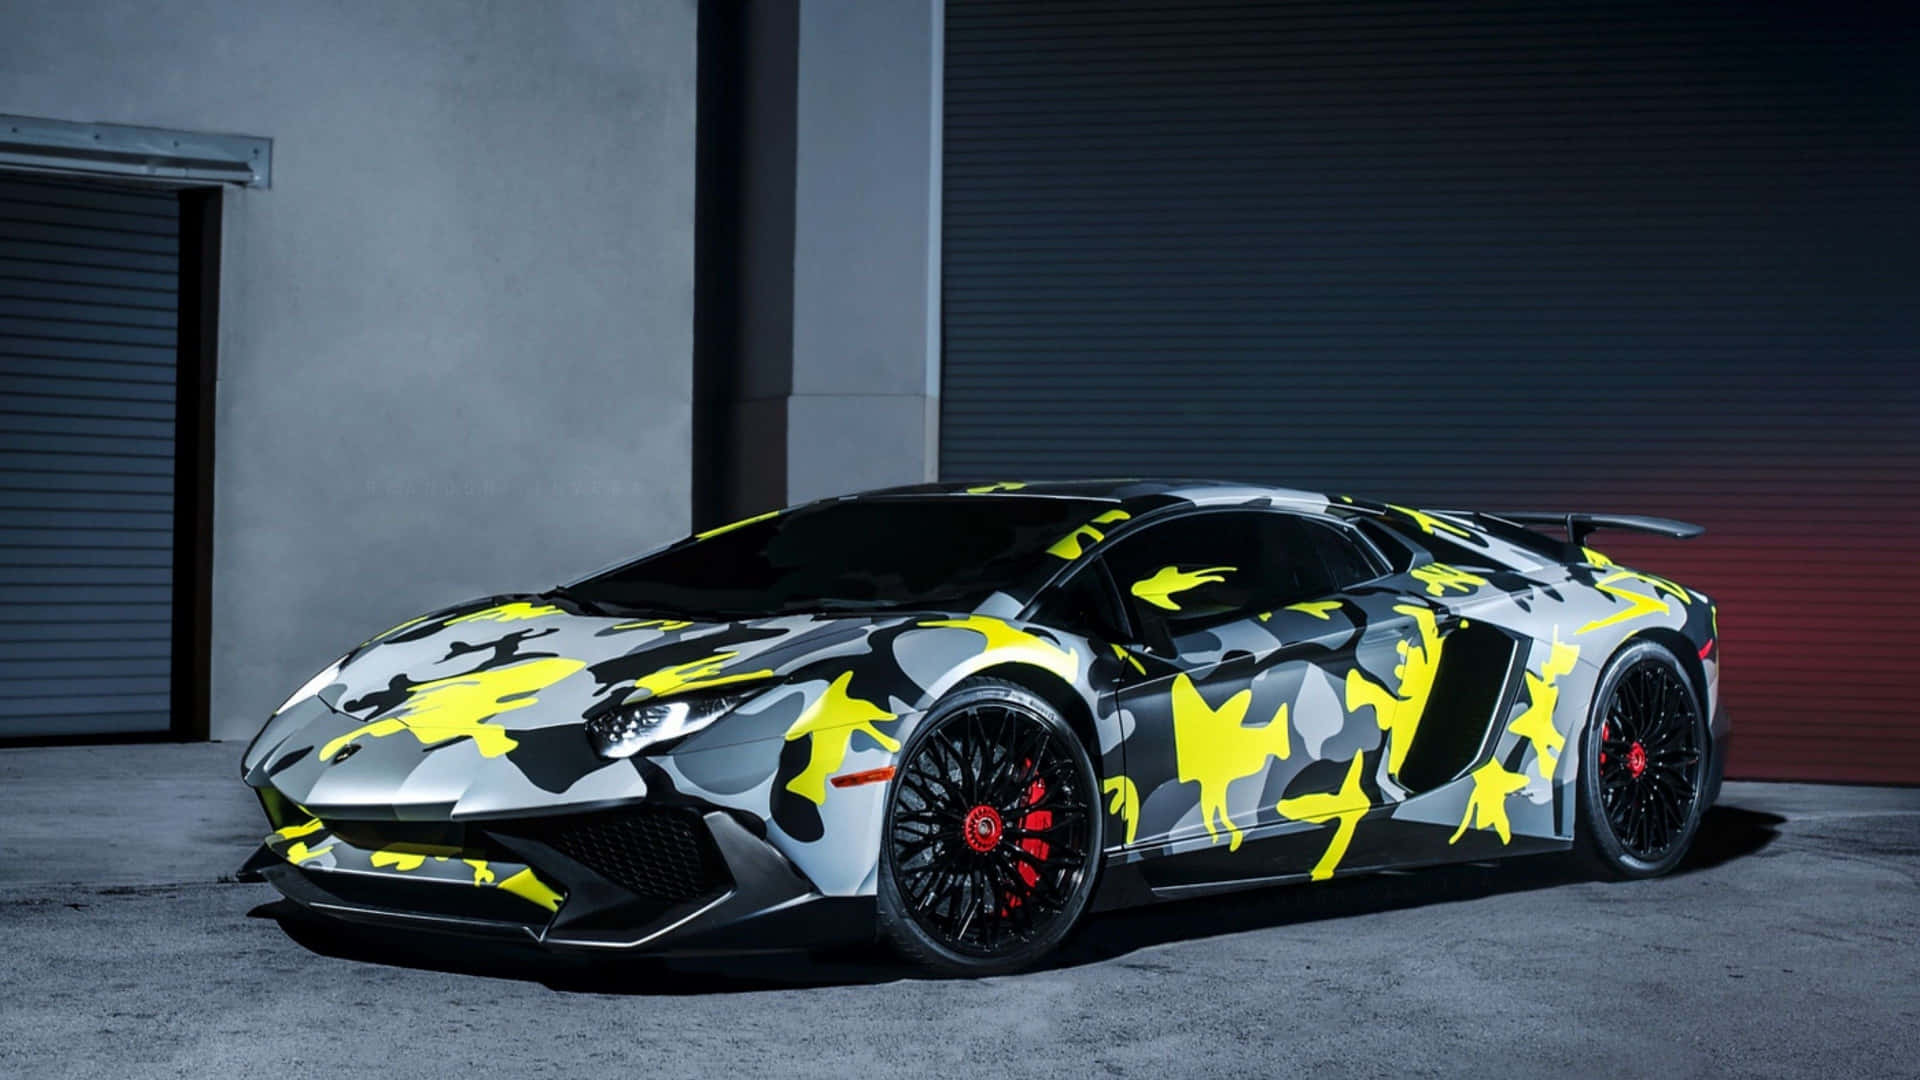 A Camouflaged Lamborghini Sports Car Is Parked In Front Of A Garage